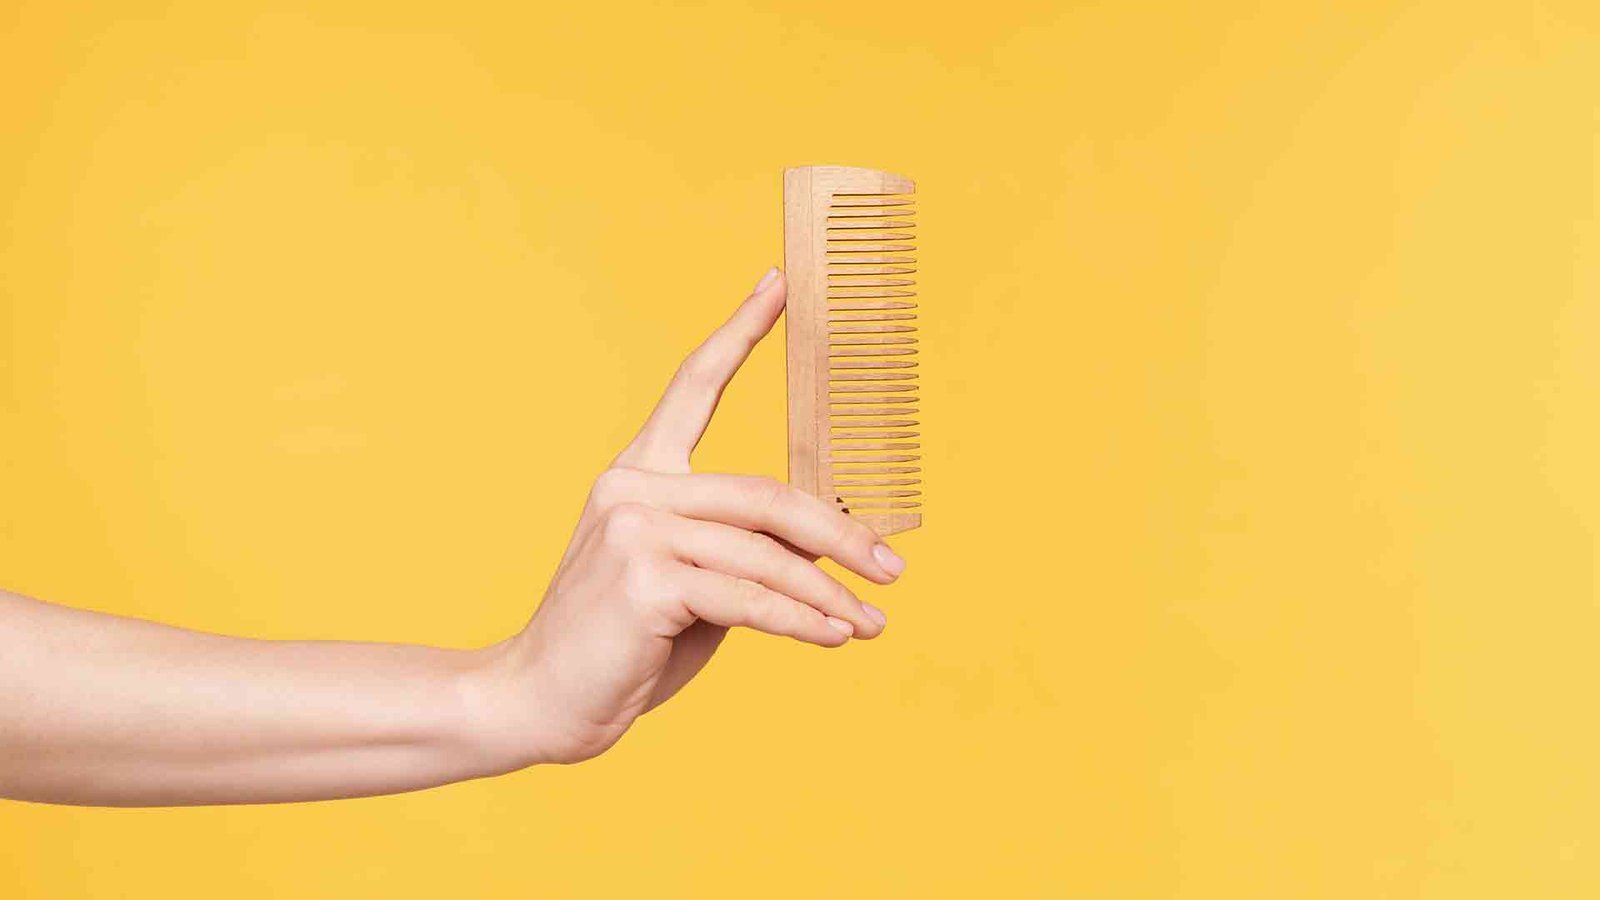 side-view-young-well-groomed-woman-s-hands-keeping-upright-wooden-while-going-comb-hair-isolated-orange-background-haircare-human-hands-concept